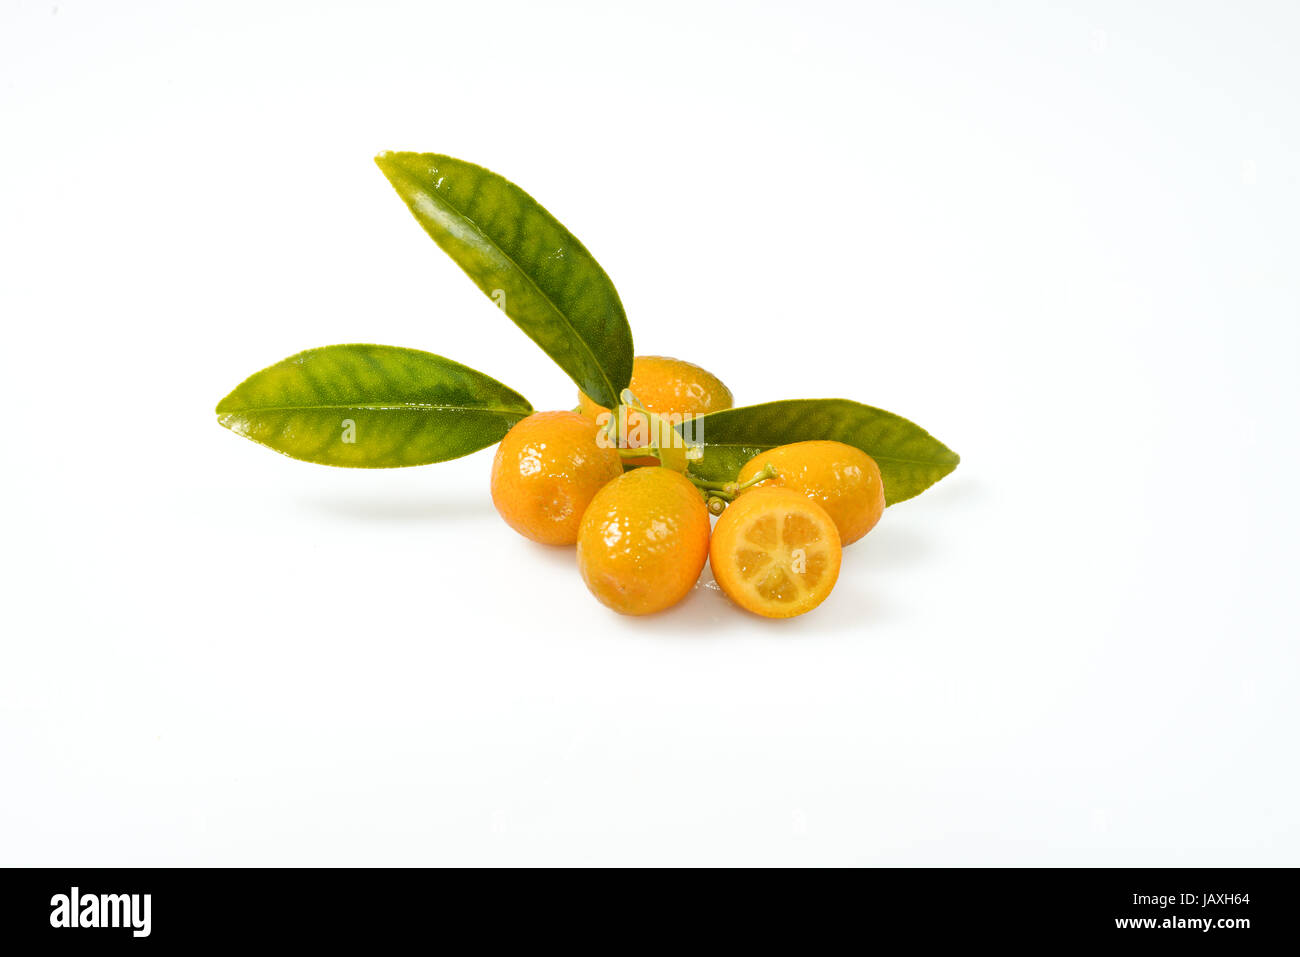 Ripe citrus with a green leaf on a white background Stock Photo